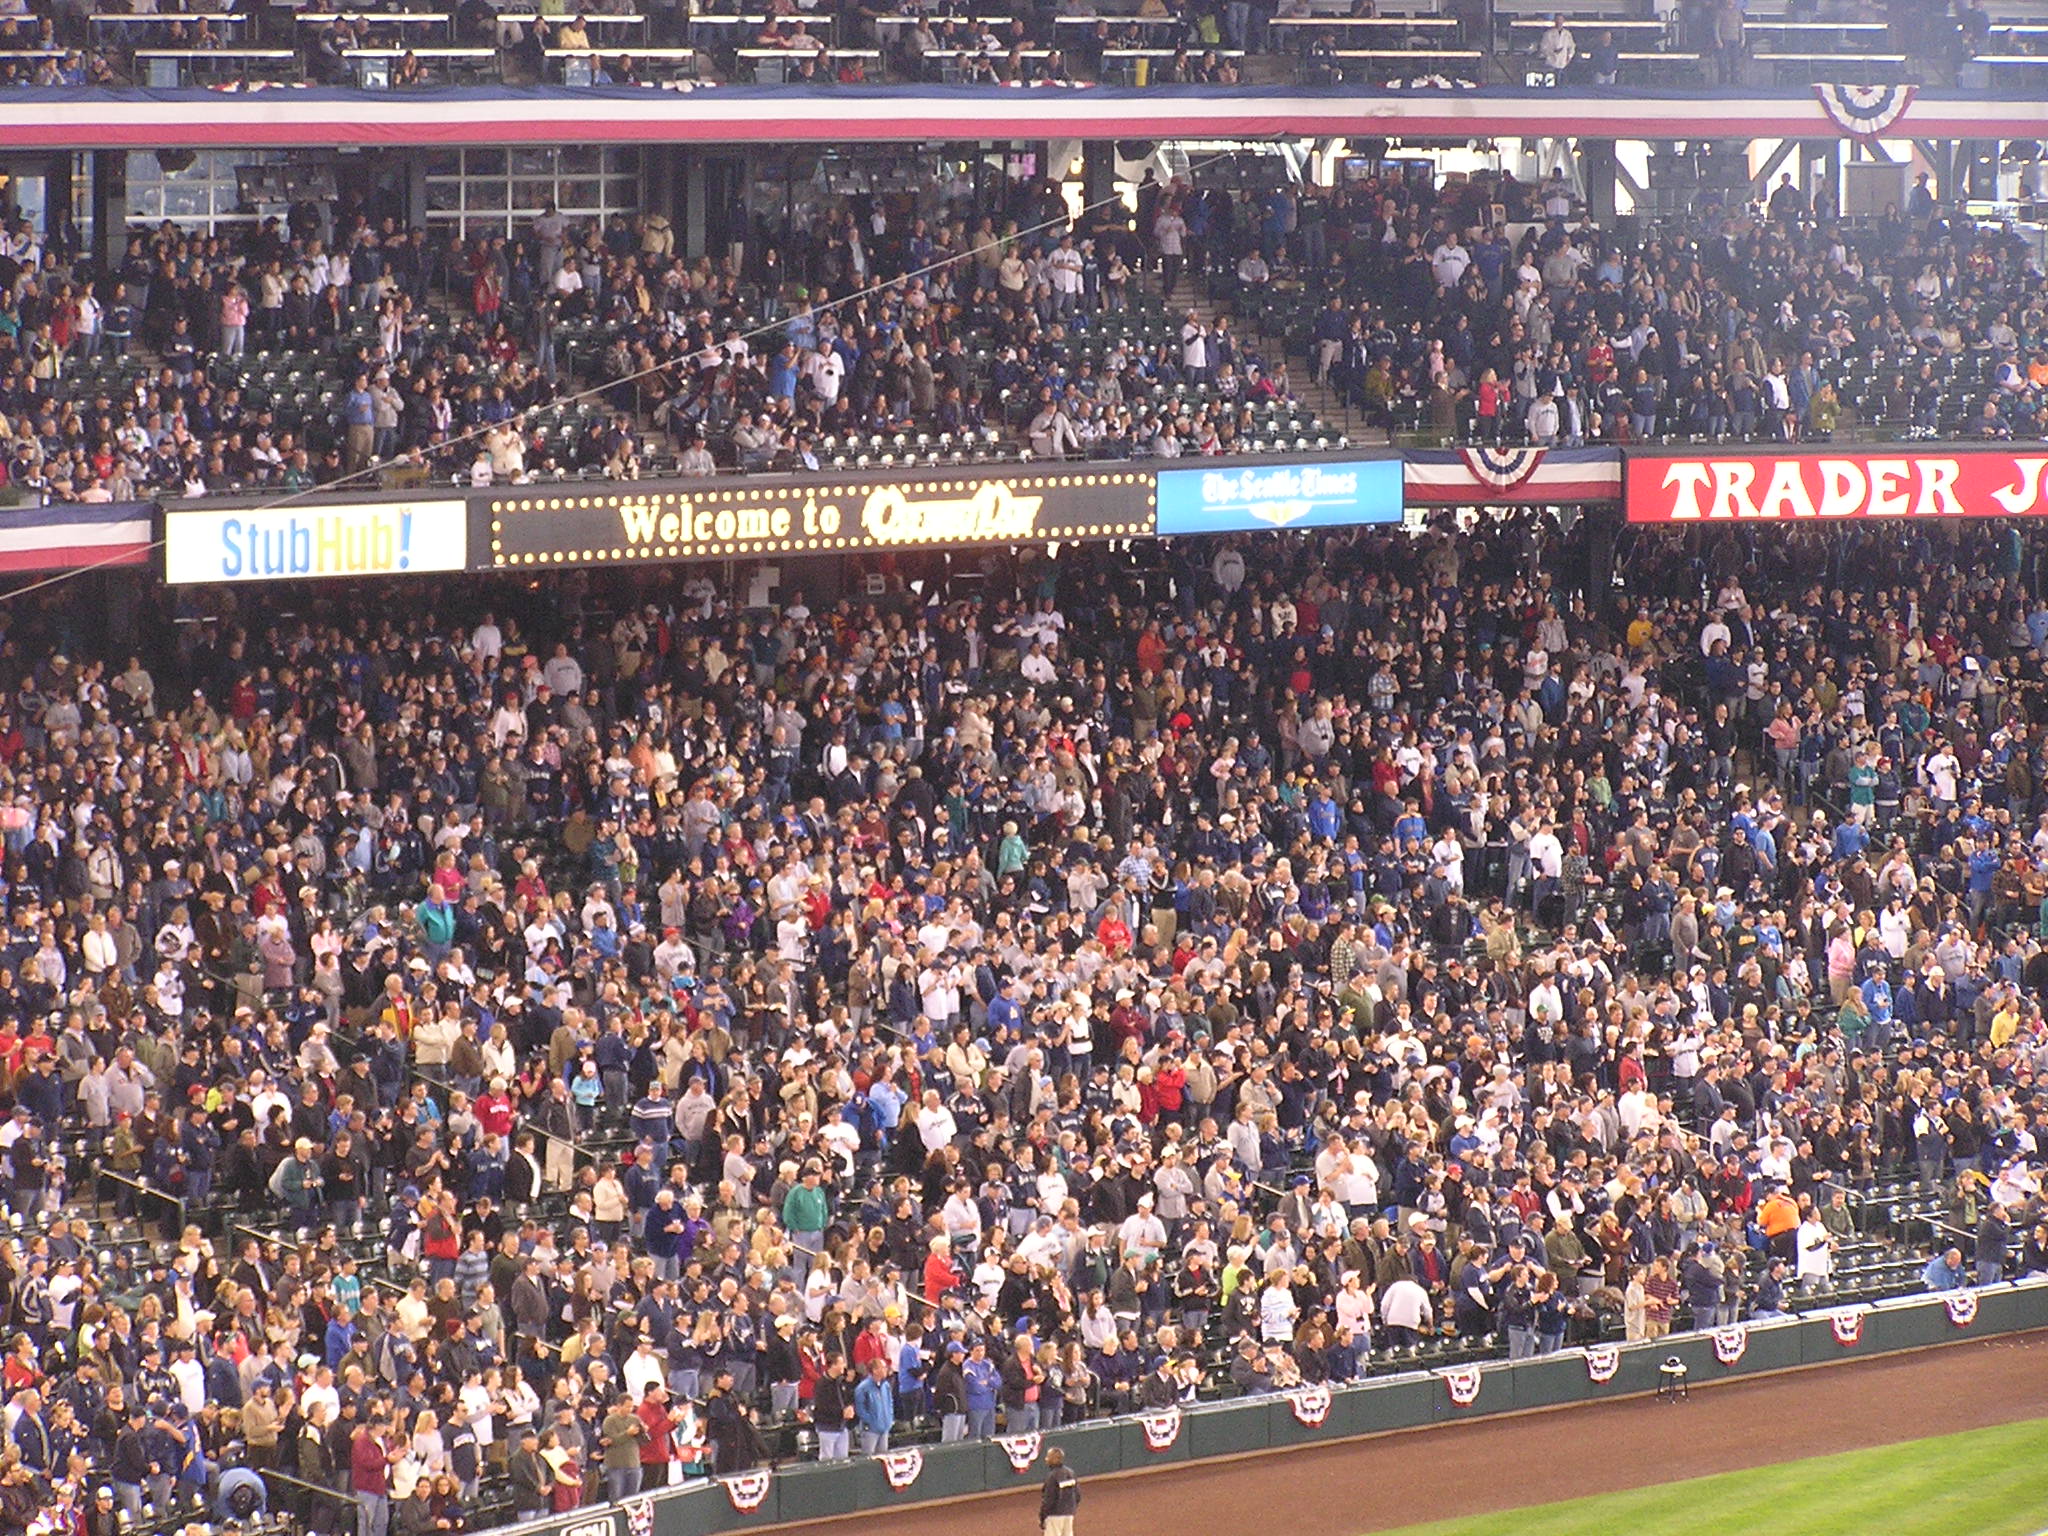 a large baseball stadium filled with people